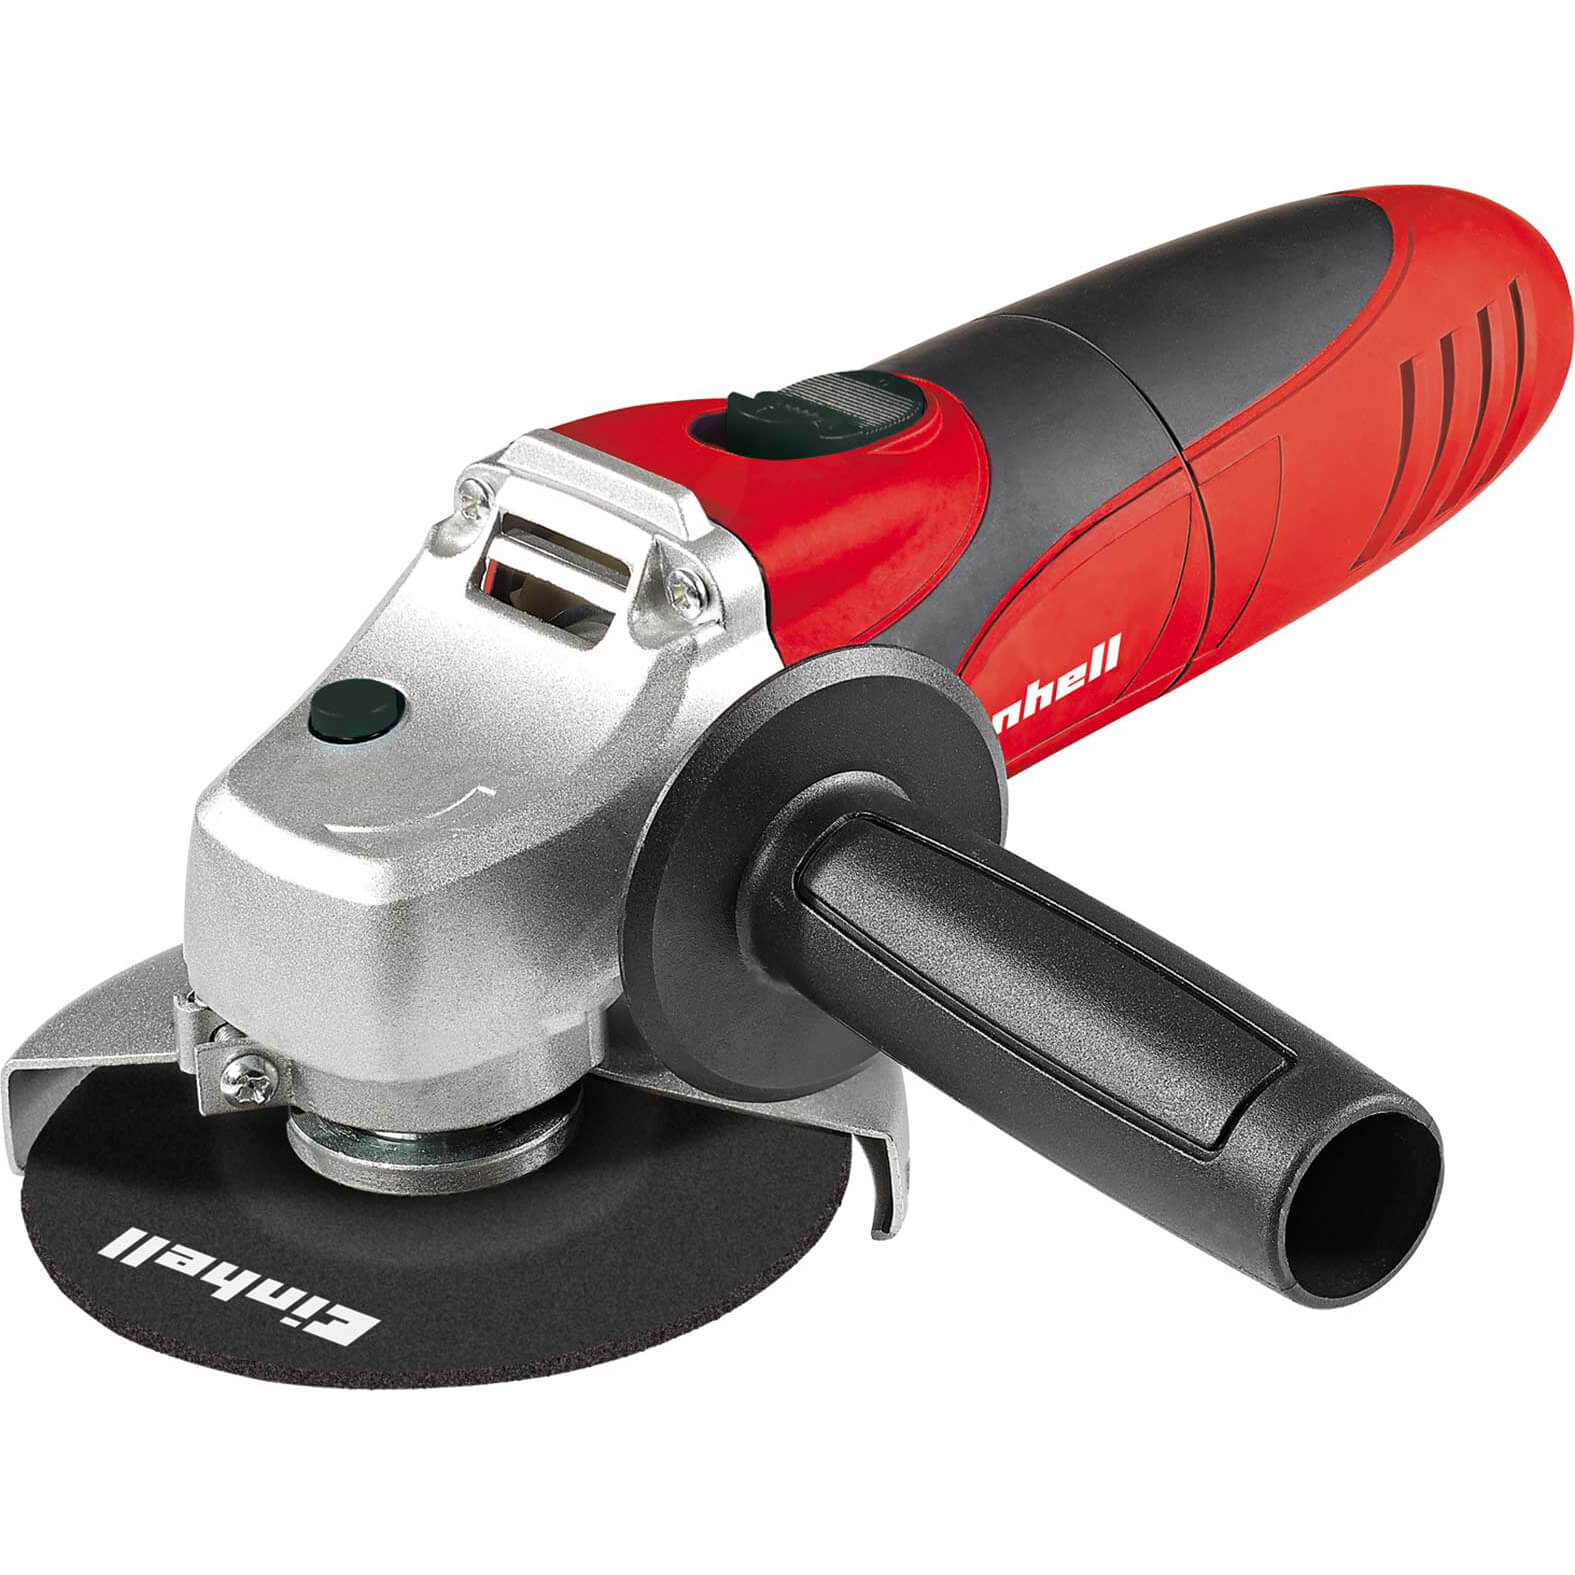 Photo of Einhell Tc-ag 115 Angle Grinder 115mm